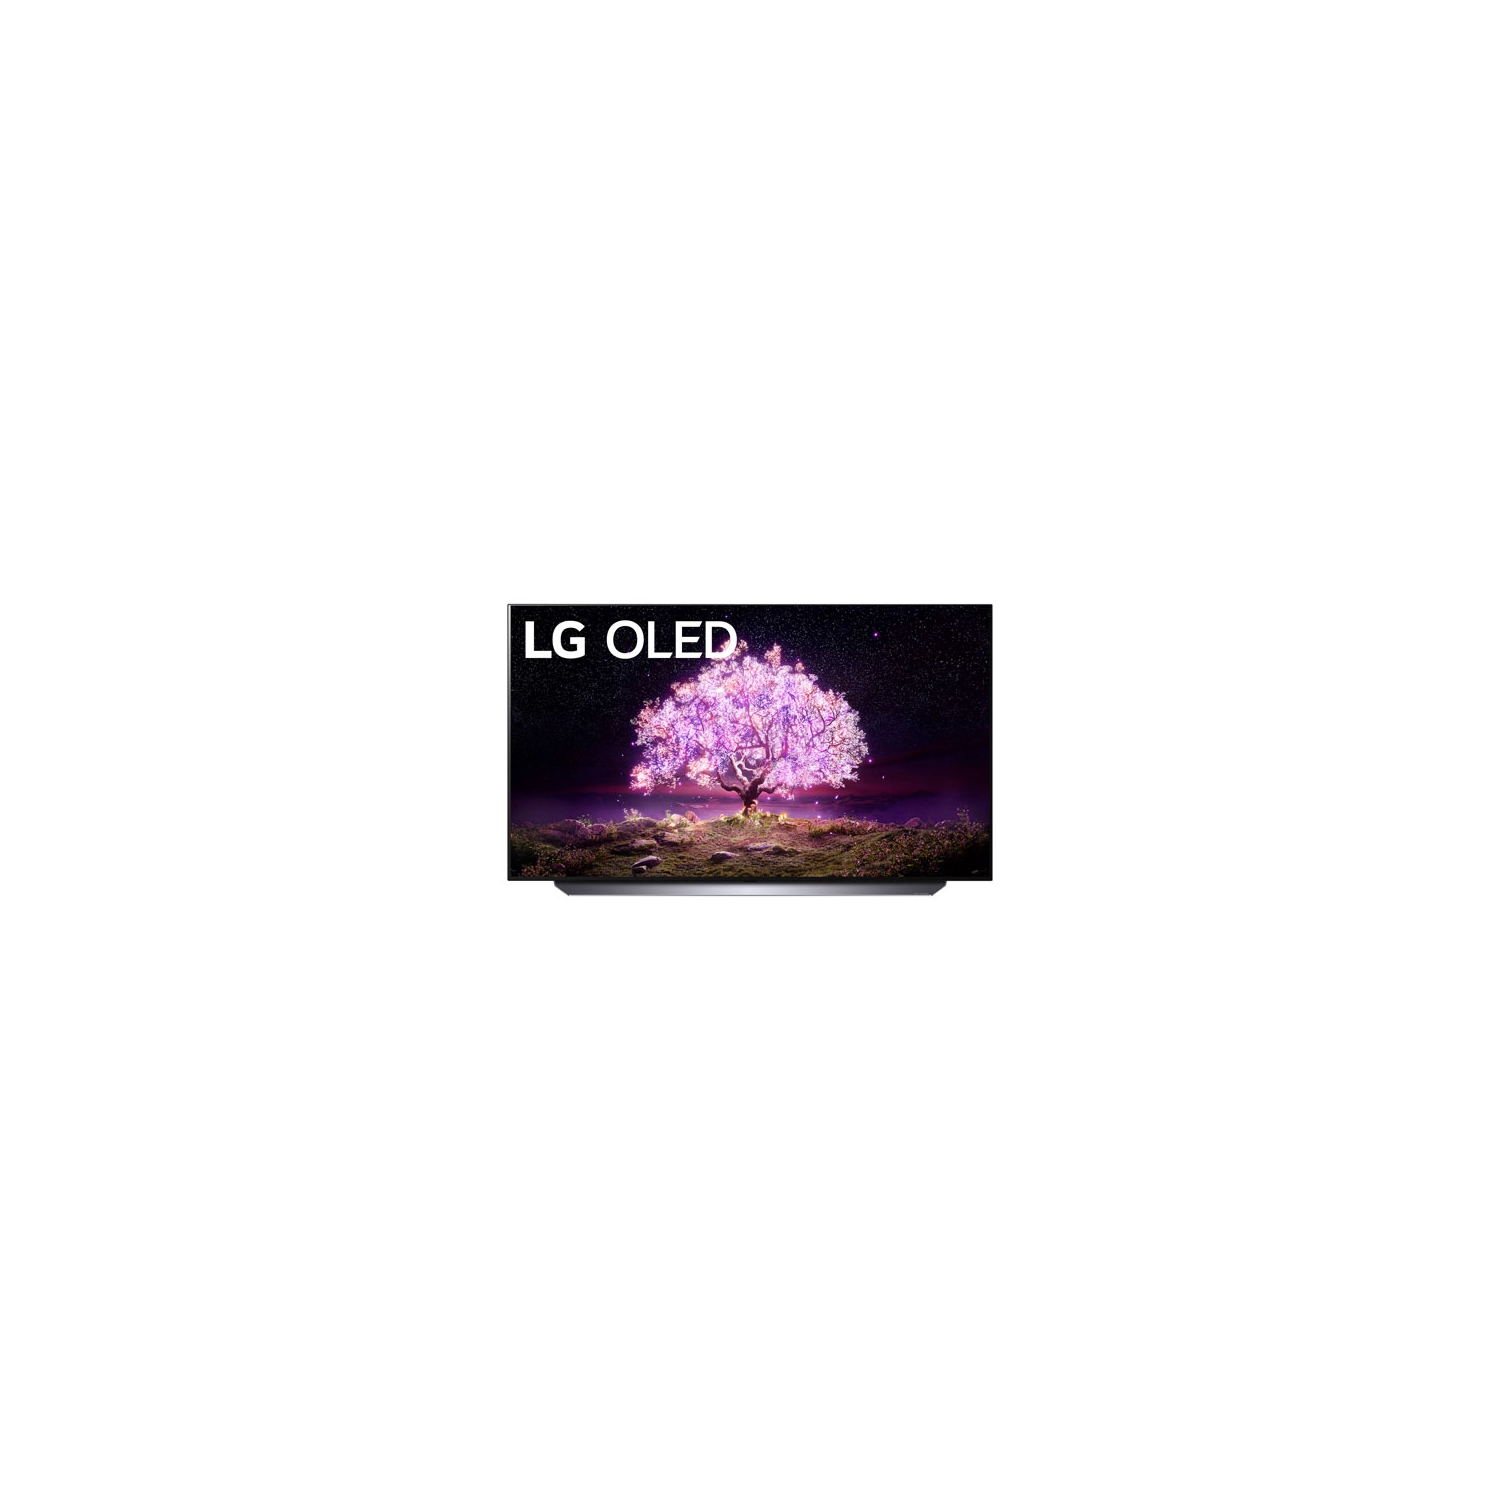 LG 55" 4K UHD HDR OLED webOS Smart TV (OLED55C1AUB) - 2021 - Open Box *BC/AB/SK/MB DELIVERY ONLY*